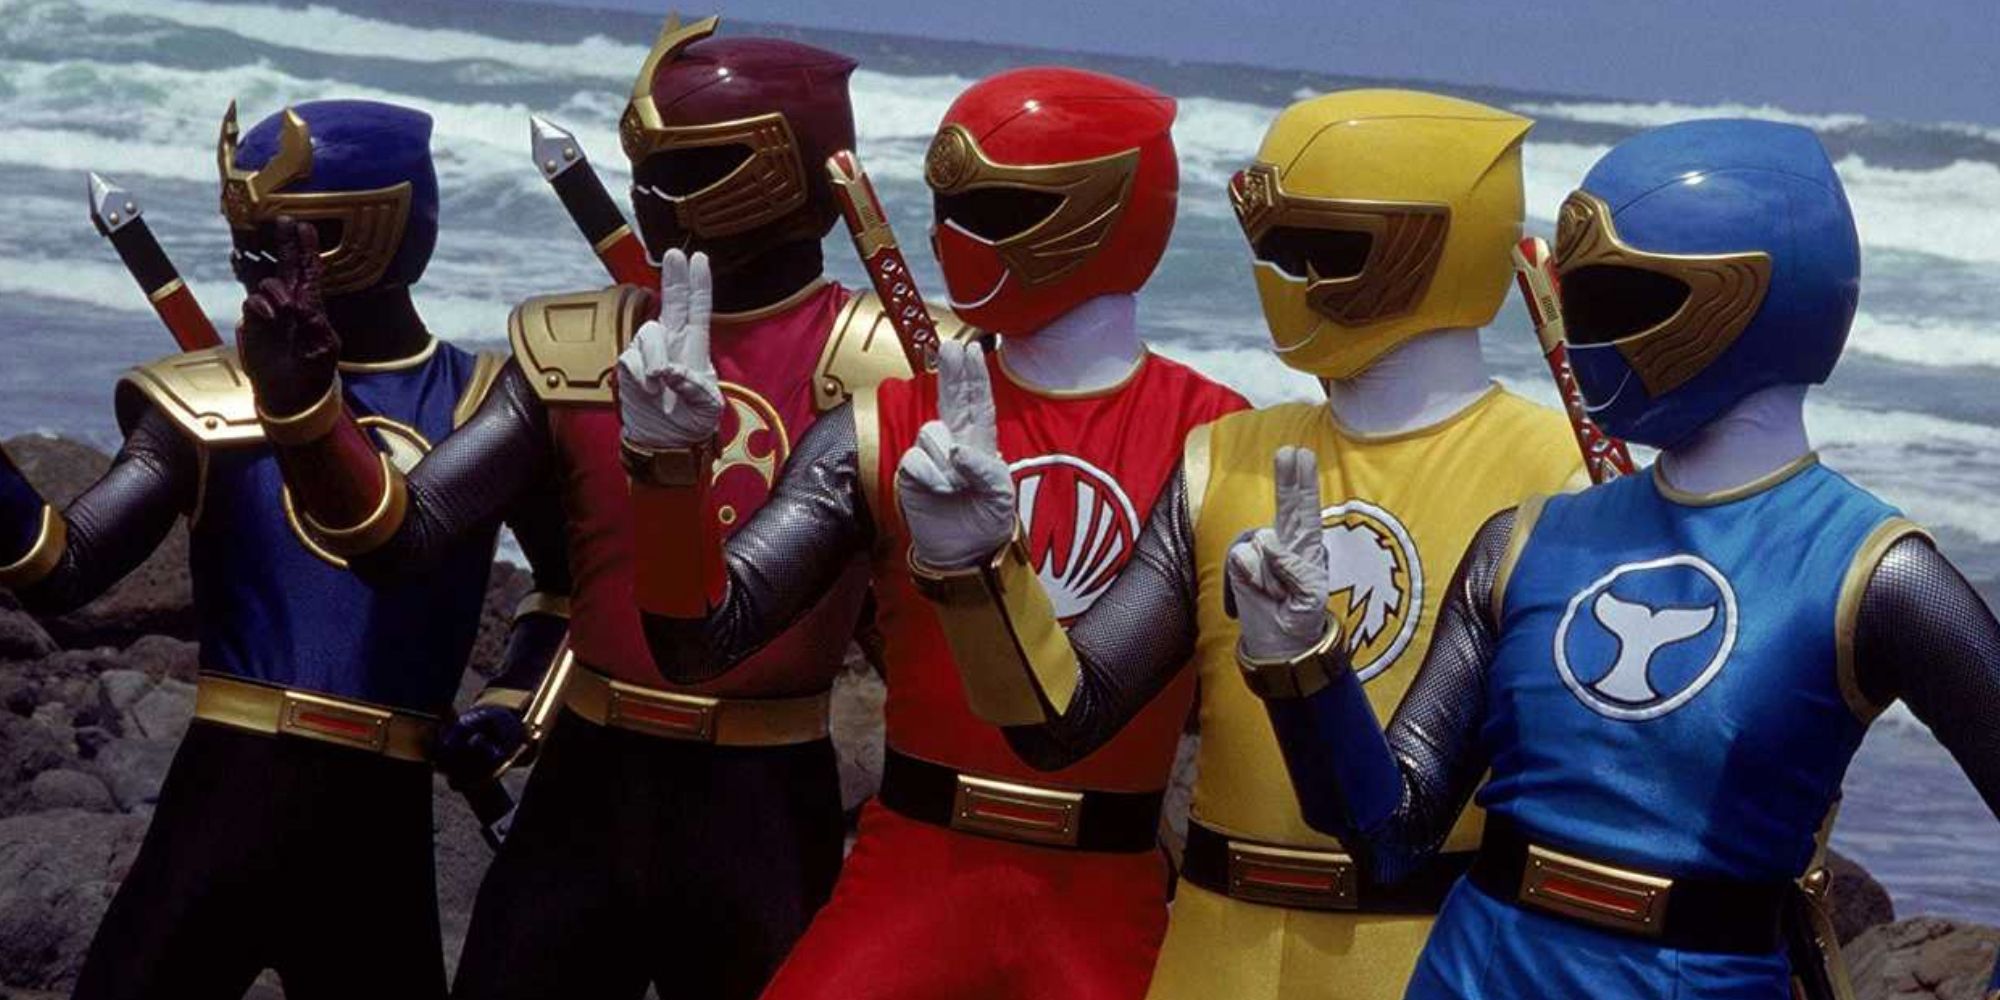 Five members of the Power Rangers Ninja Storm team stand together in uniform on the beach